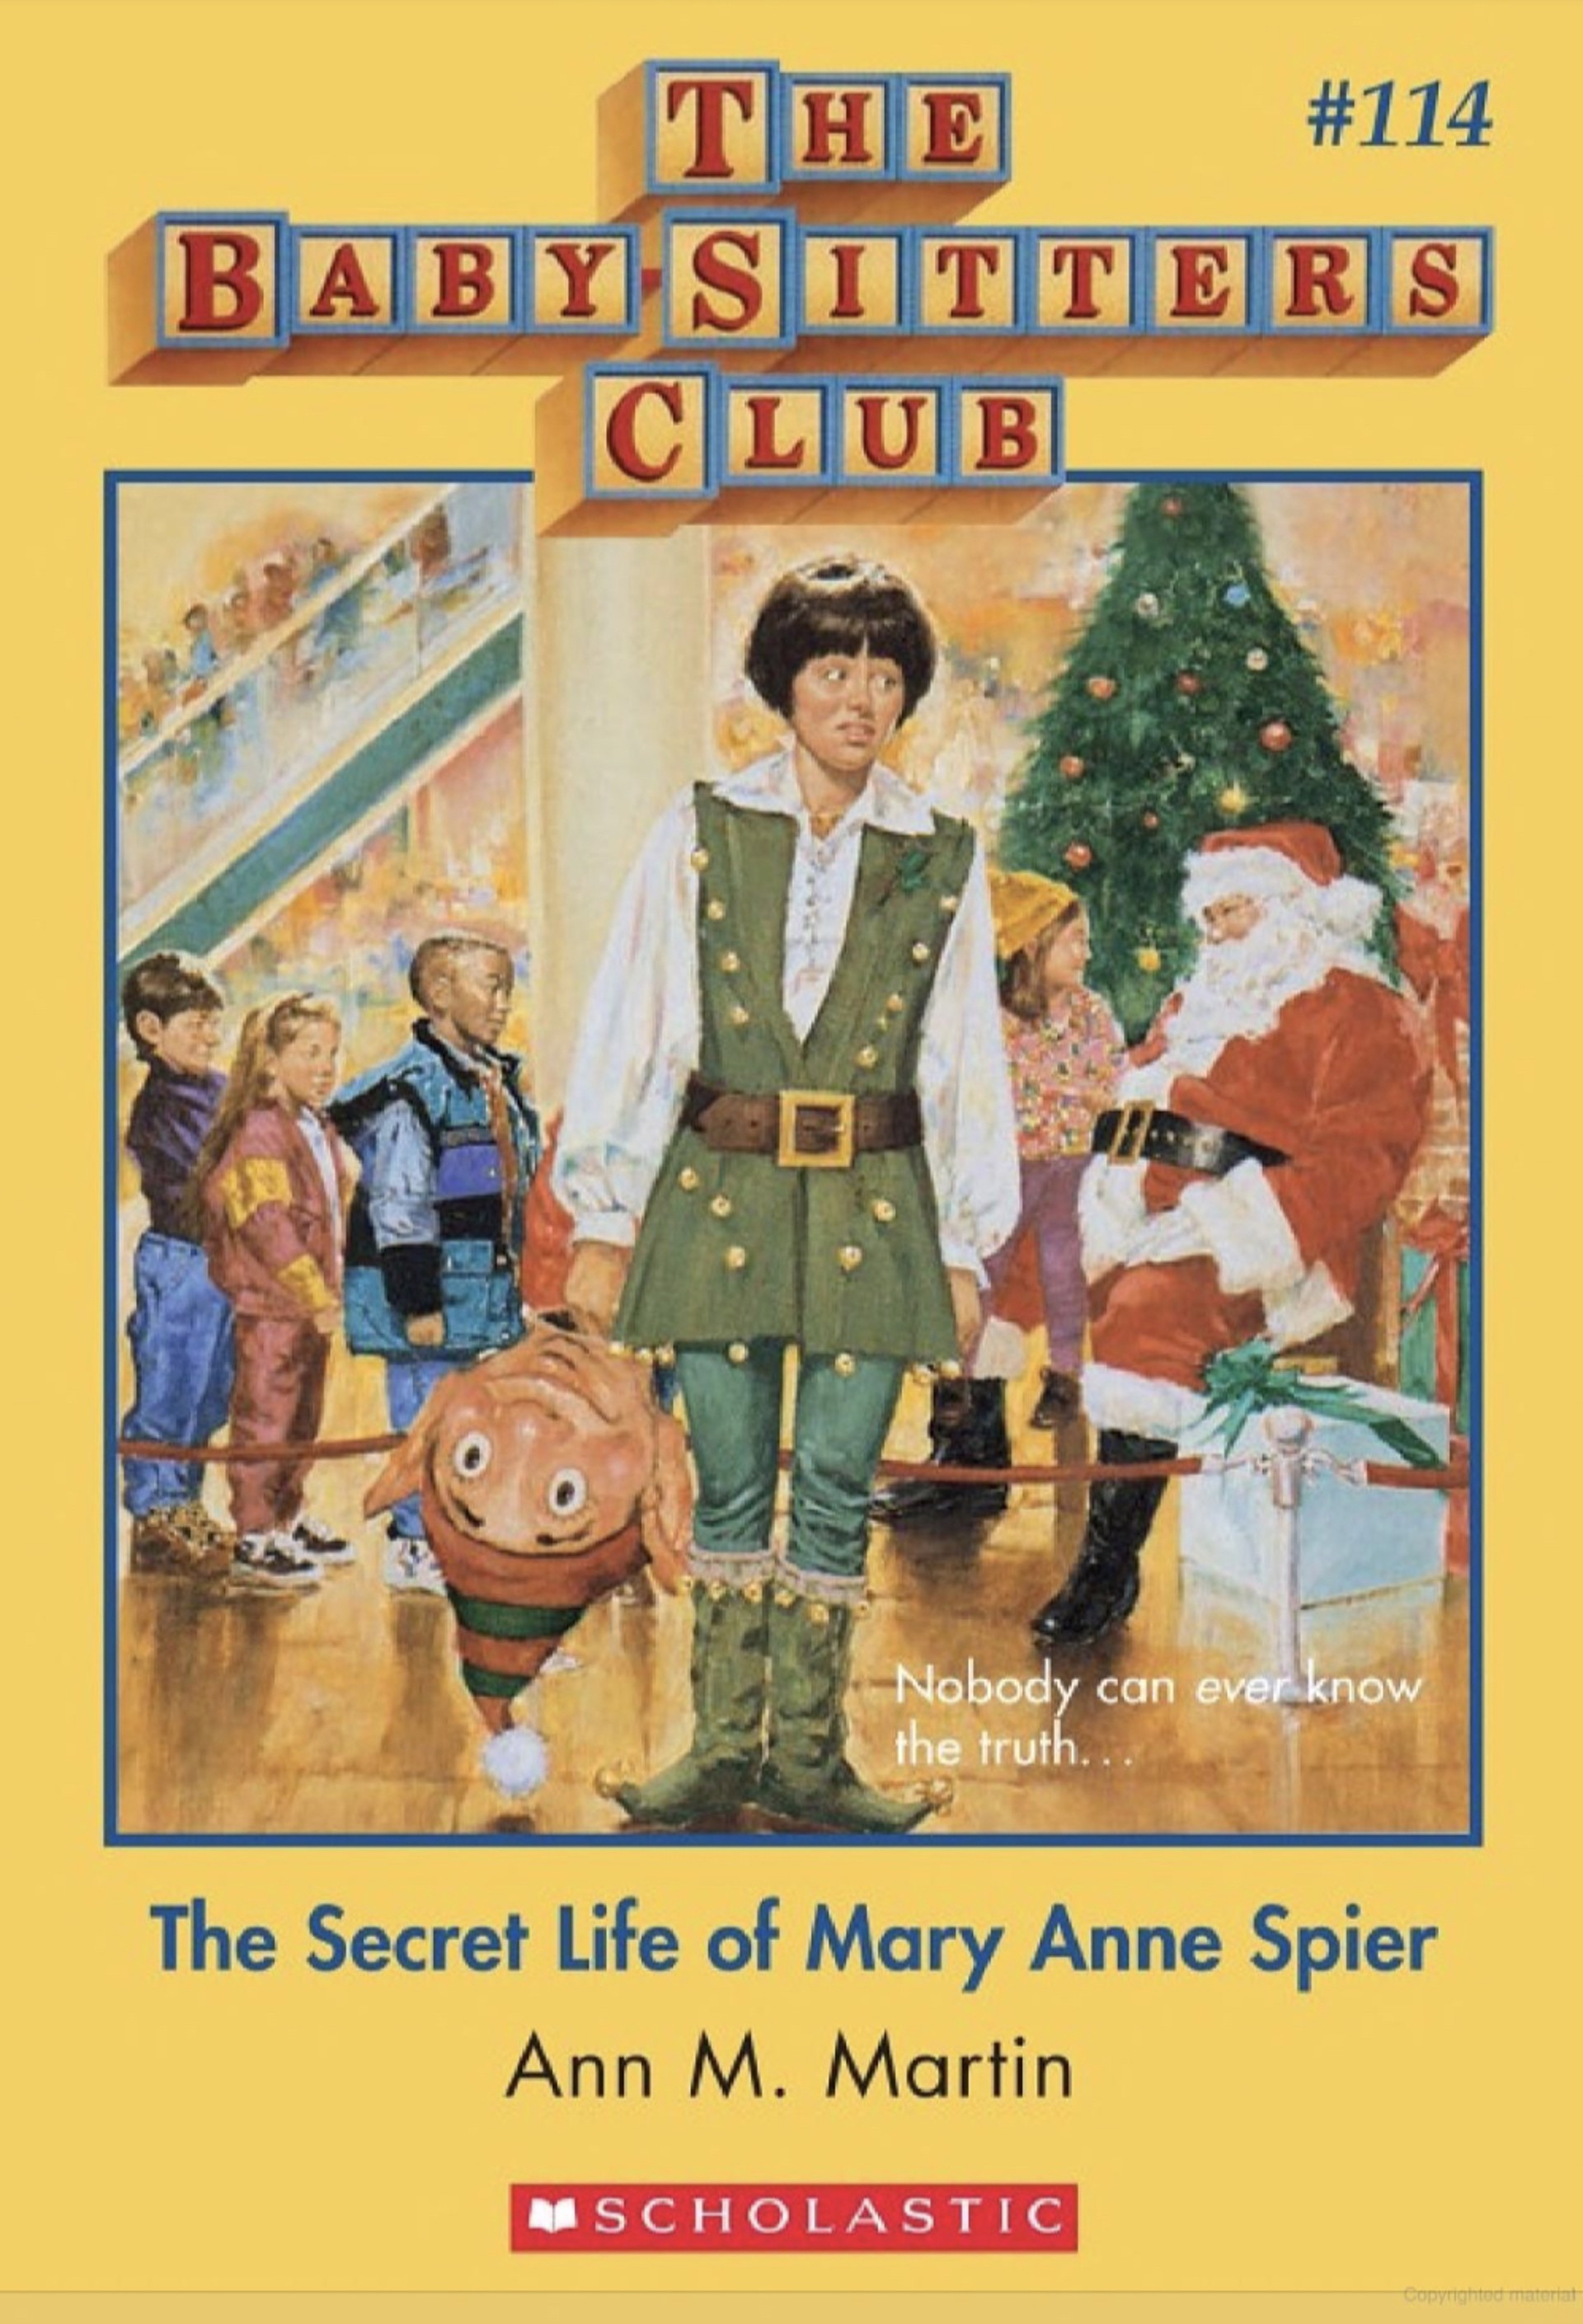 The Babysitter’s Club #114 “The Secret Life of Mary Anne Spier” by Hodges Soileau